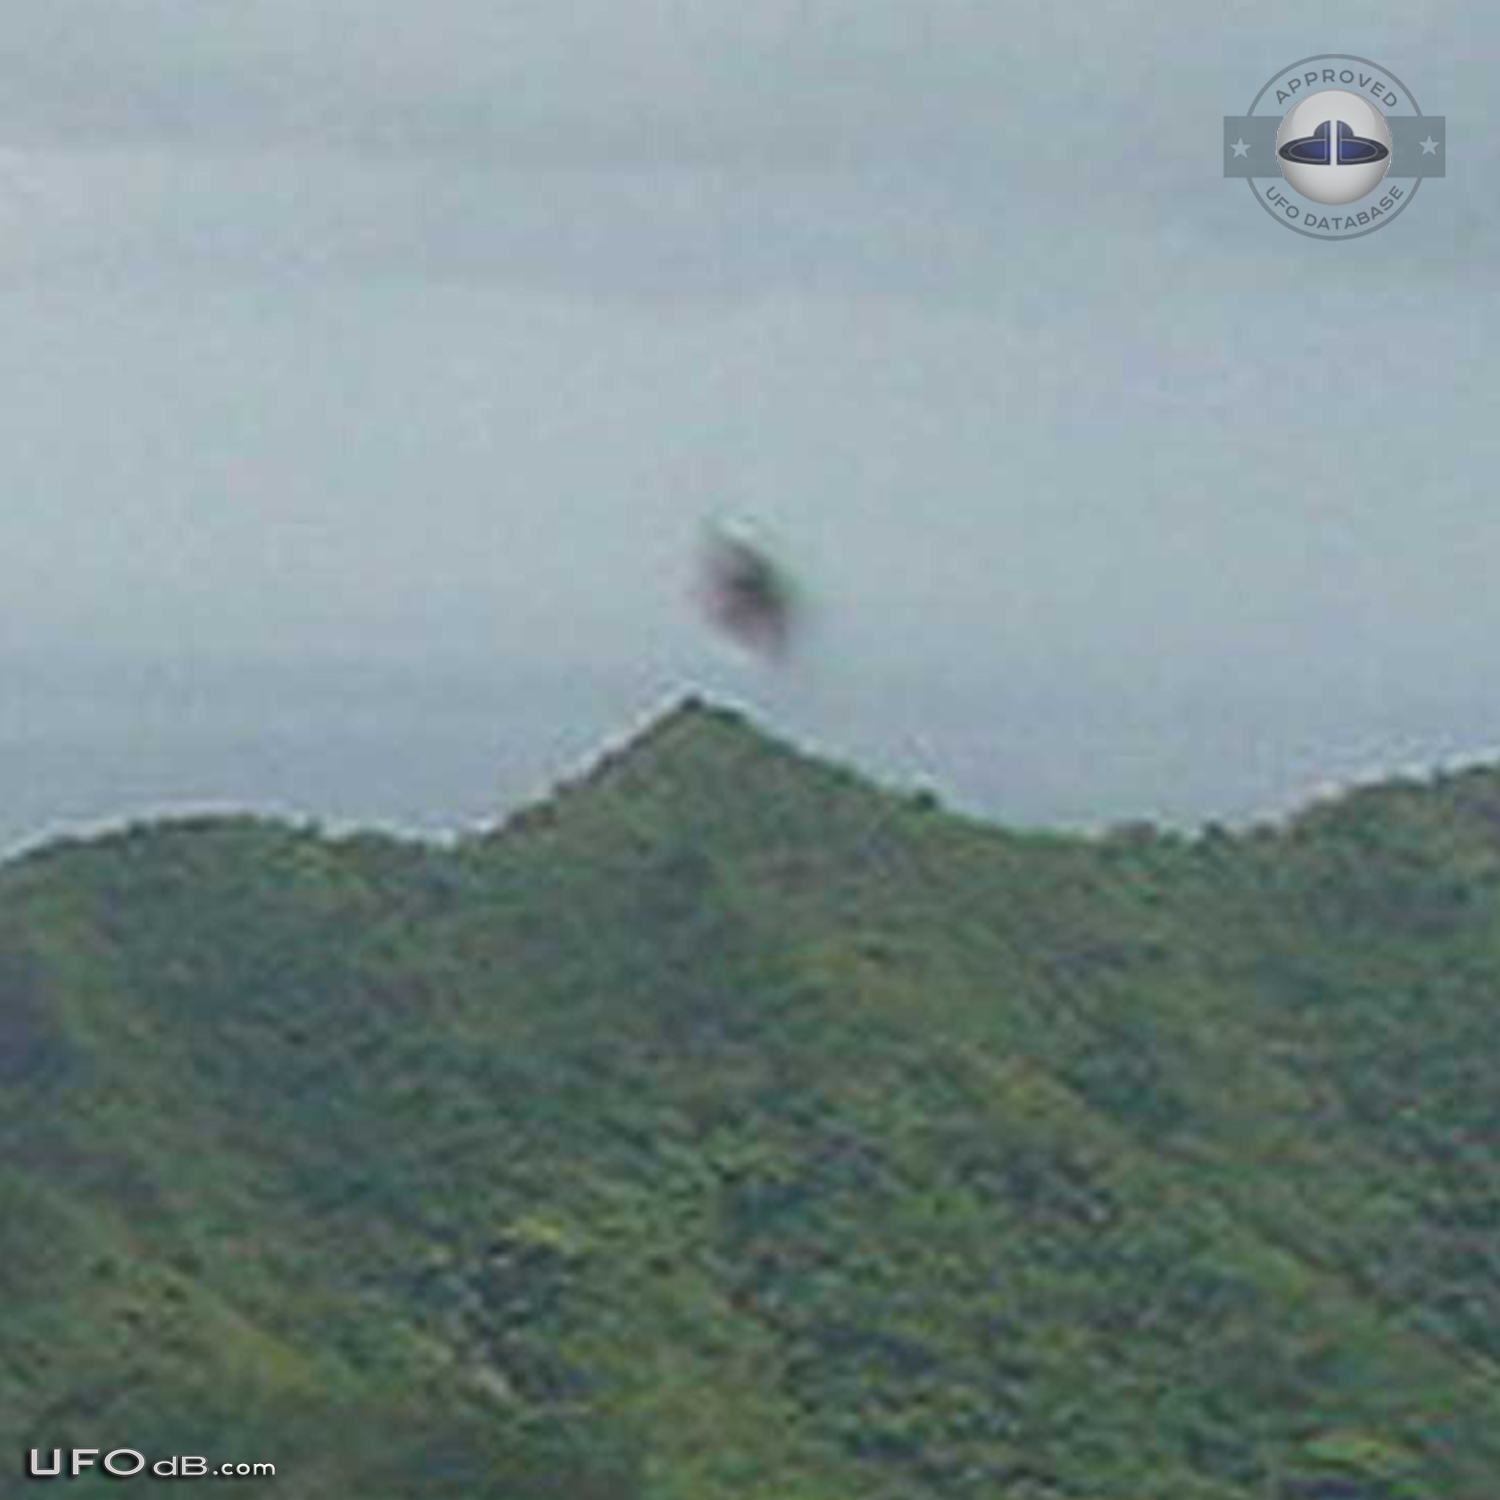 UFO caught on picture over mountain in Oahu, Hawaii in June 2004 UFO Picture #430-3